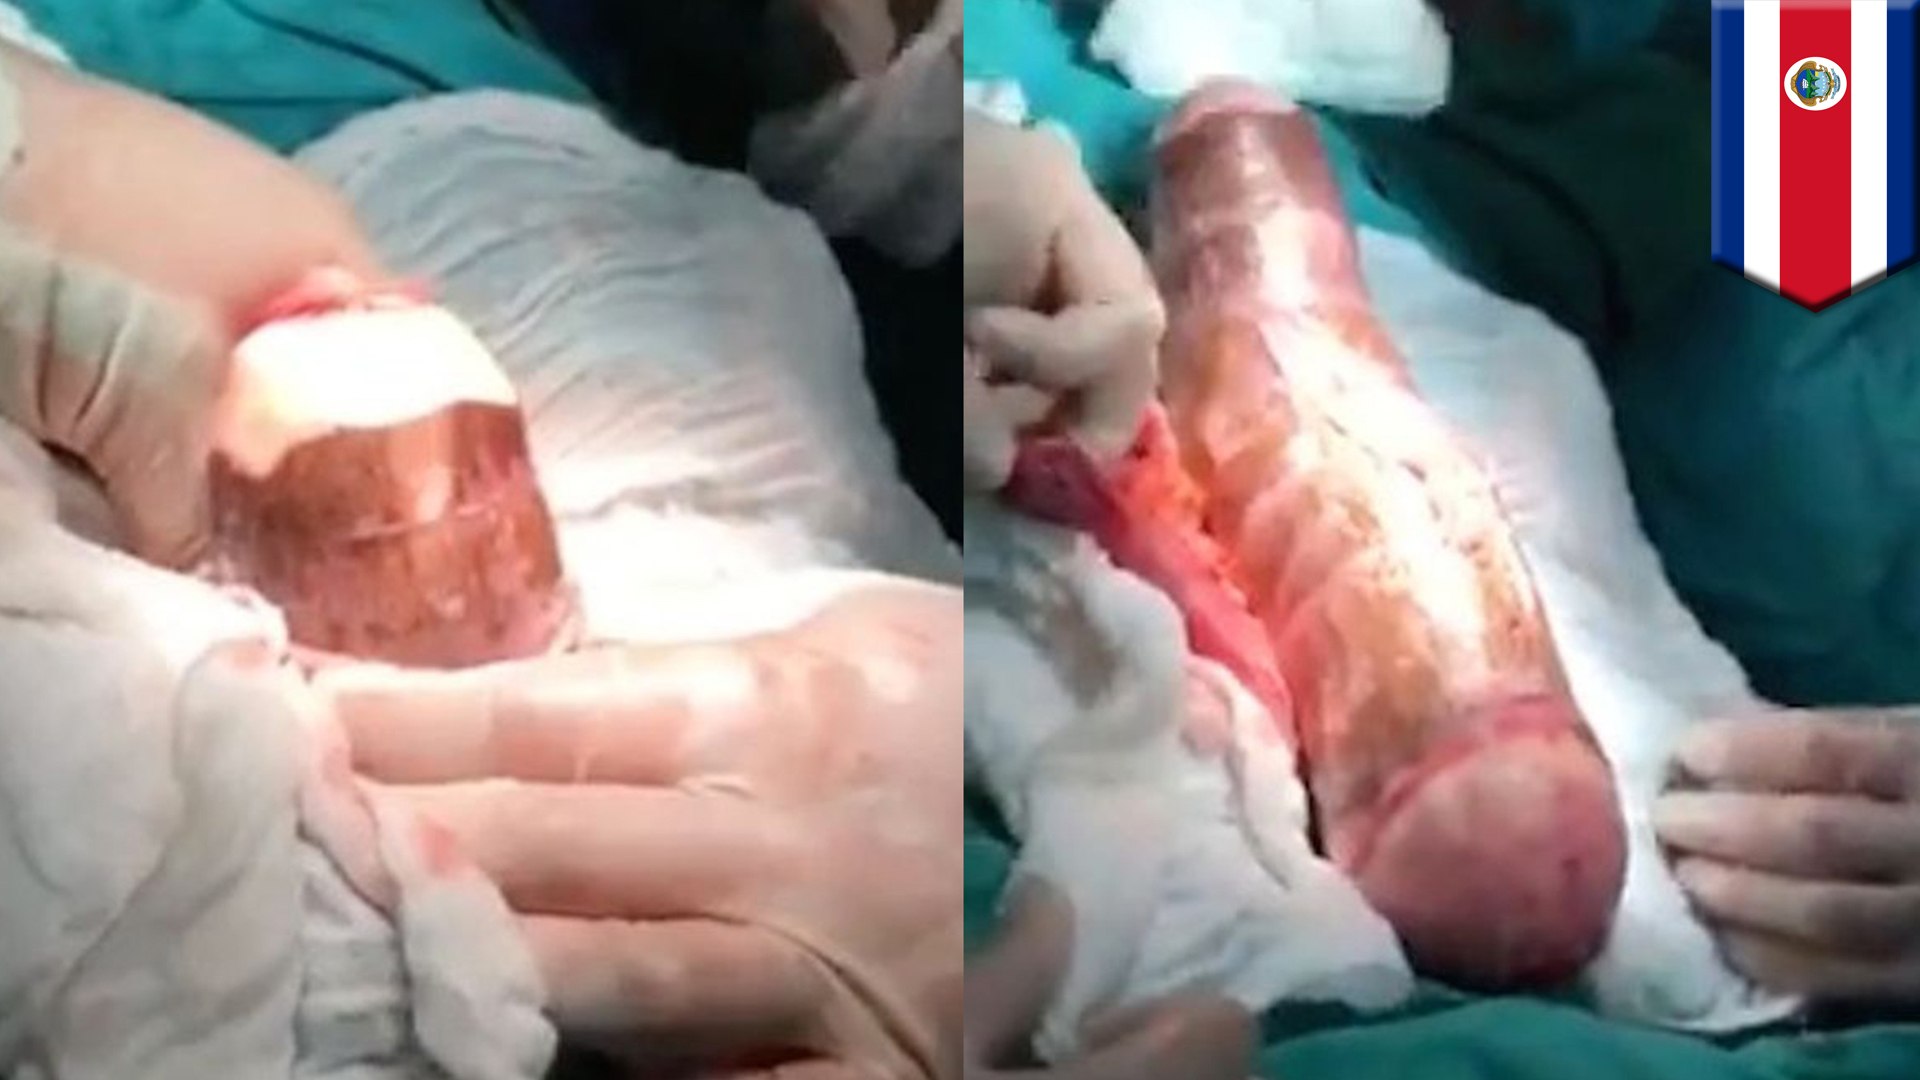 Giant improvised vegetable dildo stuck in man's anus removed after  hour-long surgery - video Dailymotion